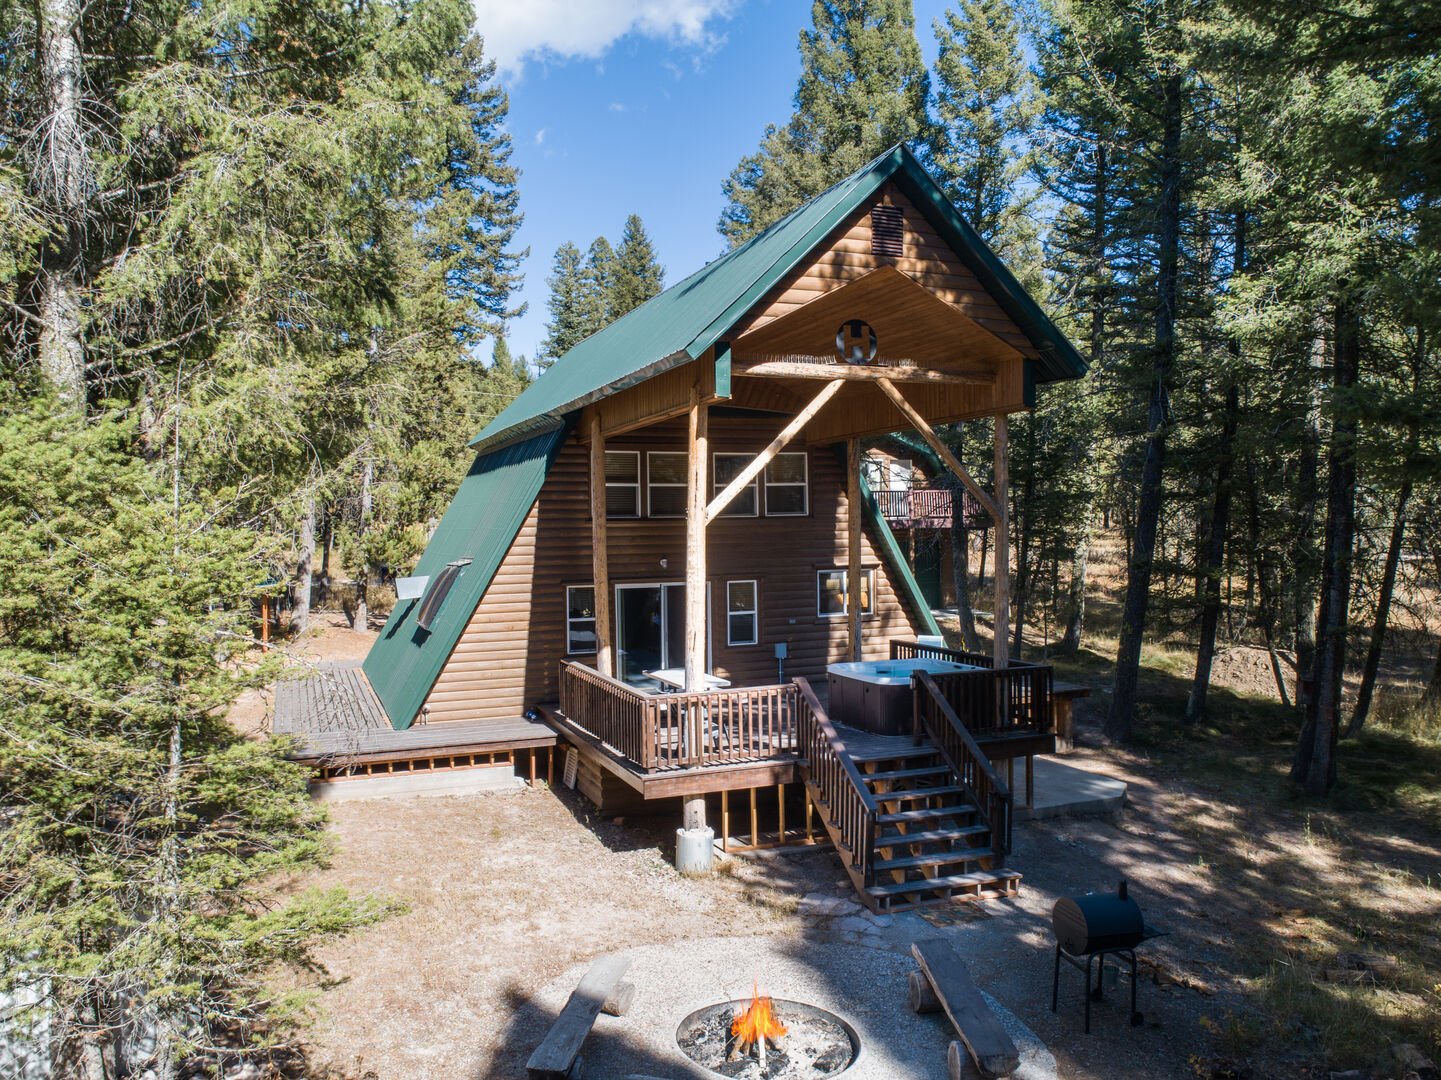 Roger Dodger ~ (TWO CABINS ON PROPERTY: MAIN CABIN AVAILABLE YEAR-ROUND AND SLEEPS 6 PEOPLE. ACCOMODATIONS ABOVE GARAGE AVAILABLE IN SUMMER ONLY AND SLEEPS ADDITIONAL 5 PEOPLE.)